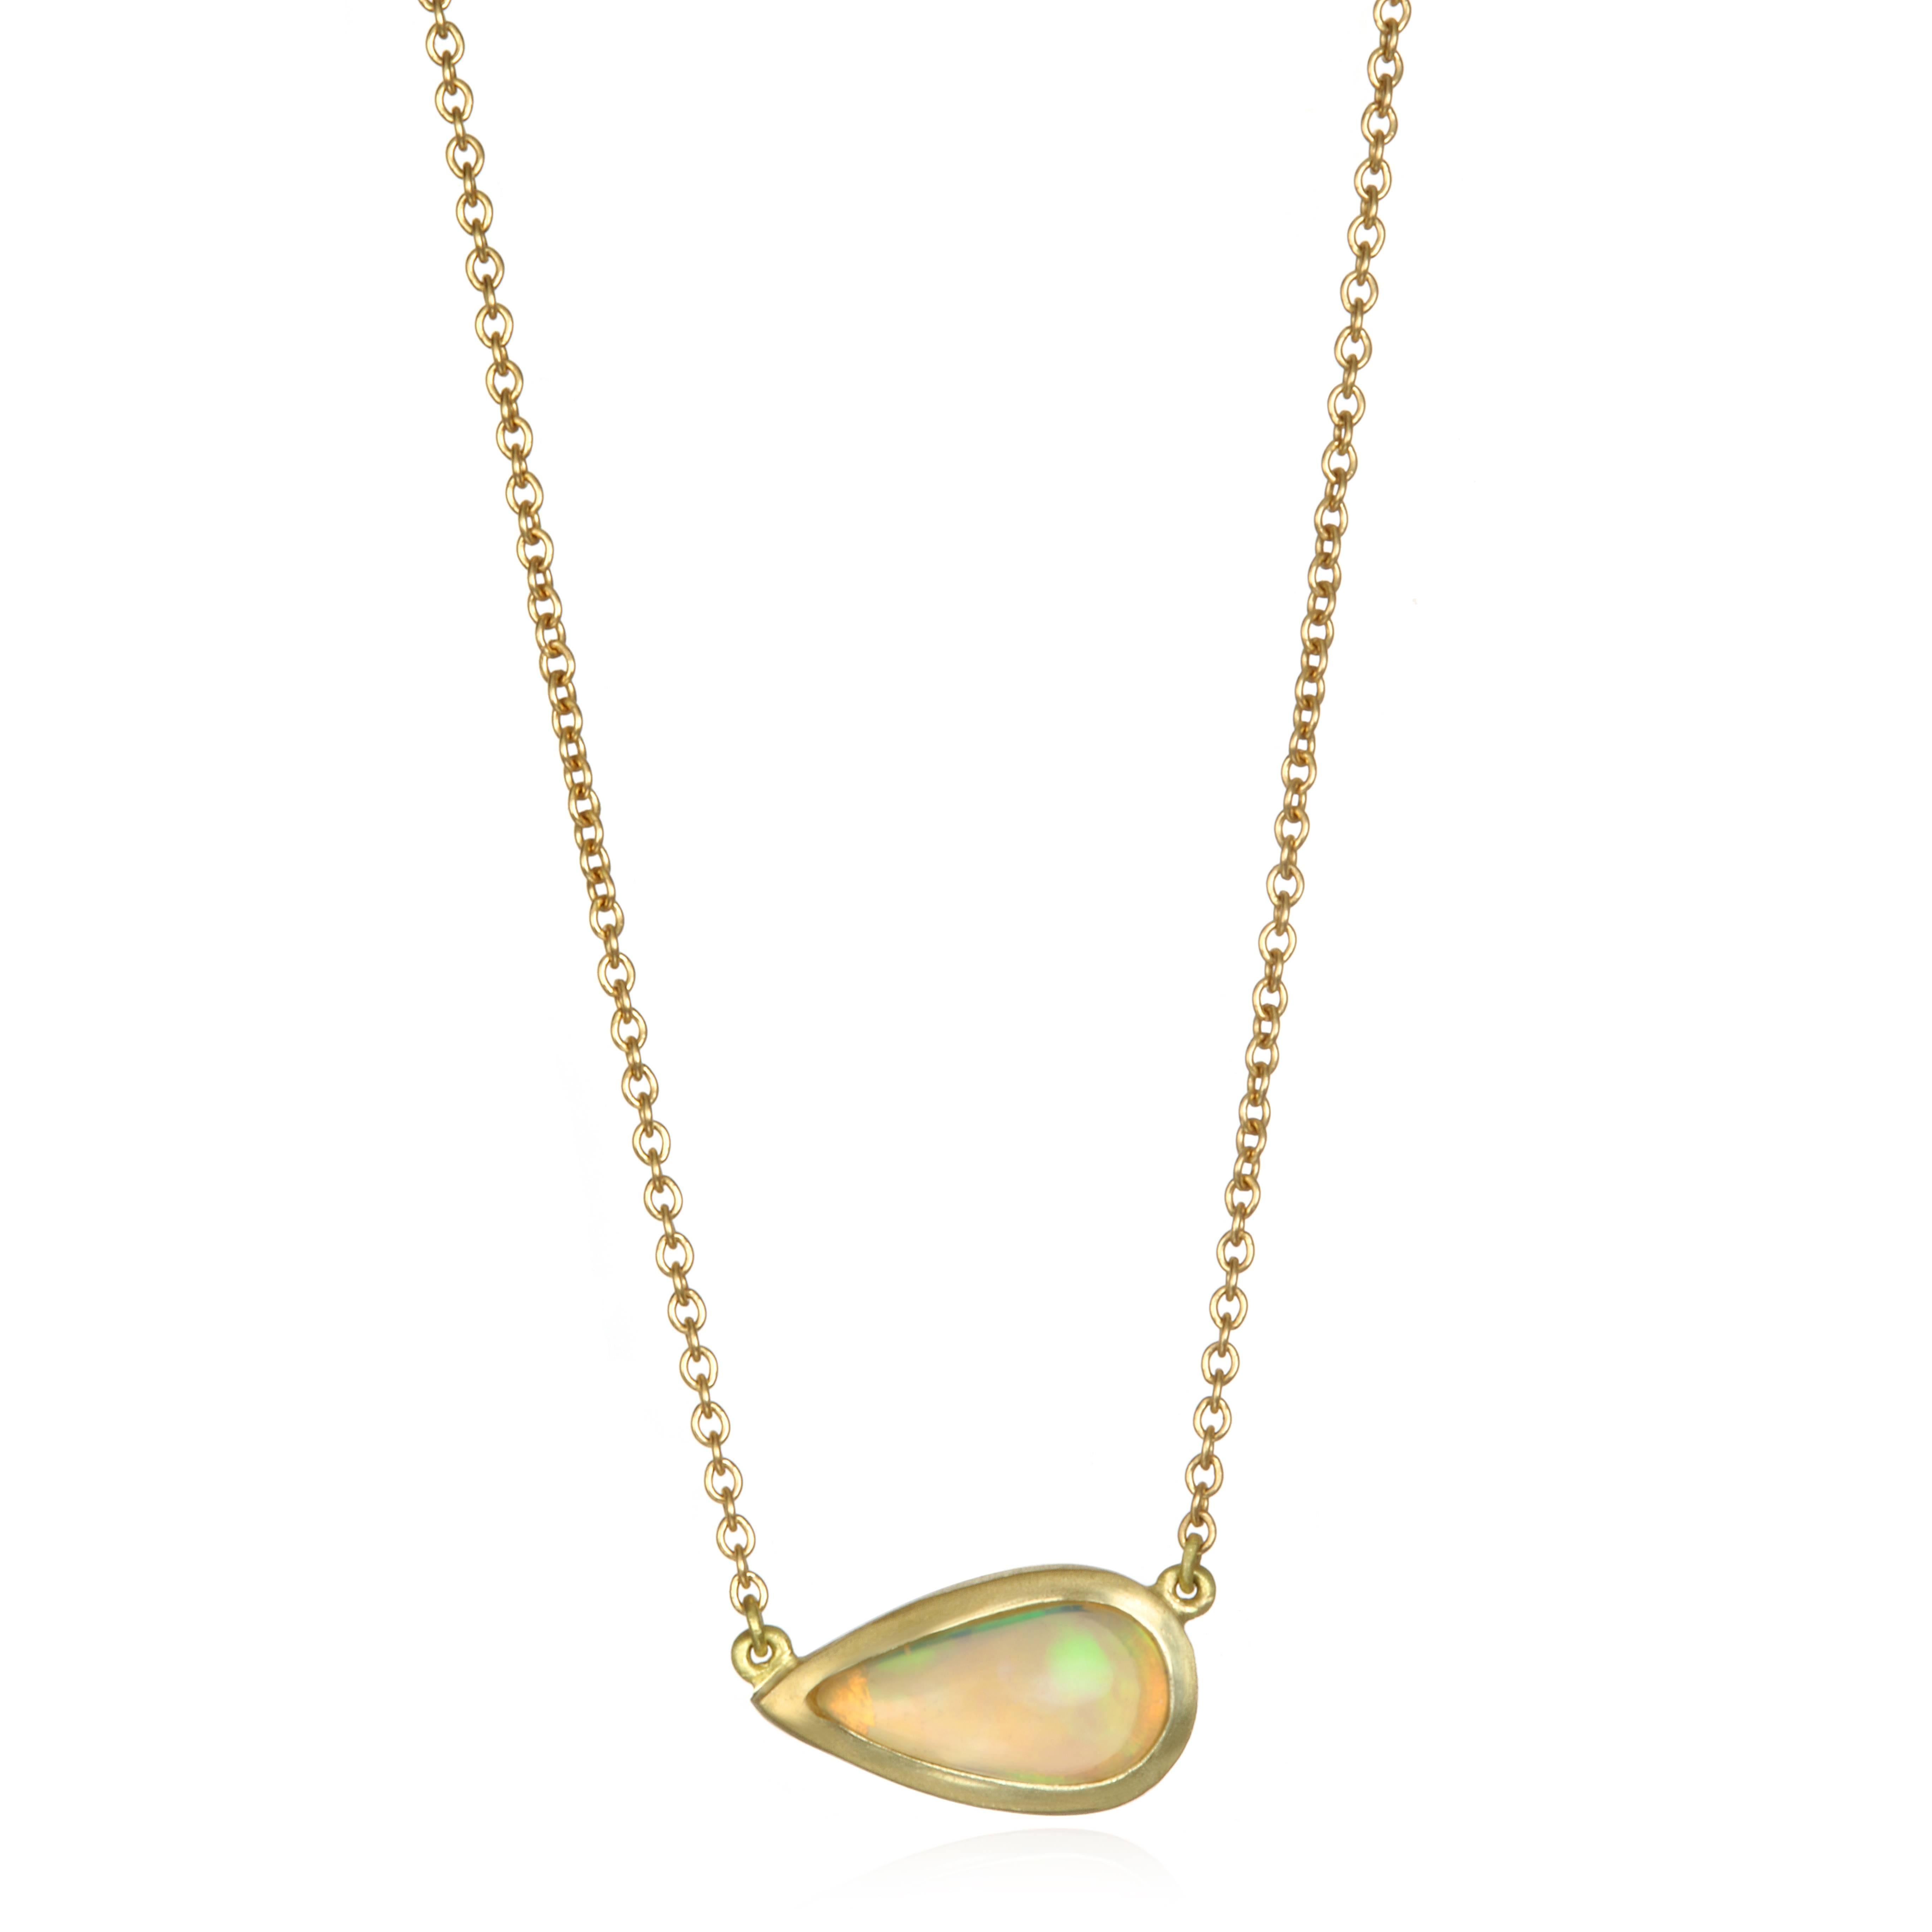 Faye Kim's 18k gold opal pendant features a teardrop shaped Ethiopian Opal on a classic cable chain, set sideways for a modern, fresh and unique style.  Adds a touch of color to any wardrobe, worn alone or add as a layering piece.

Length is